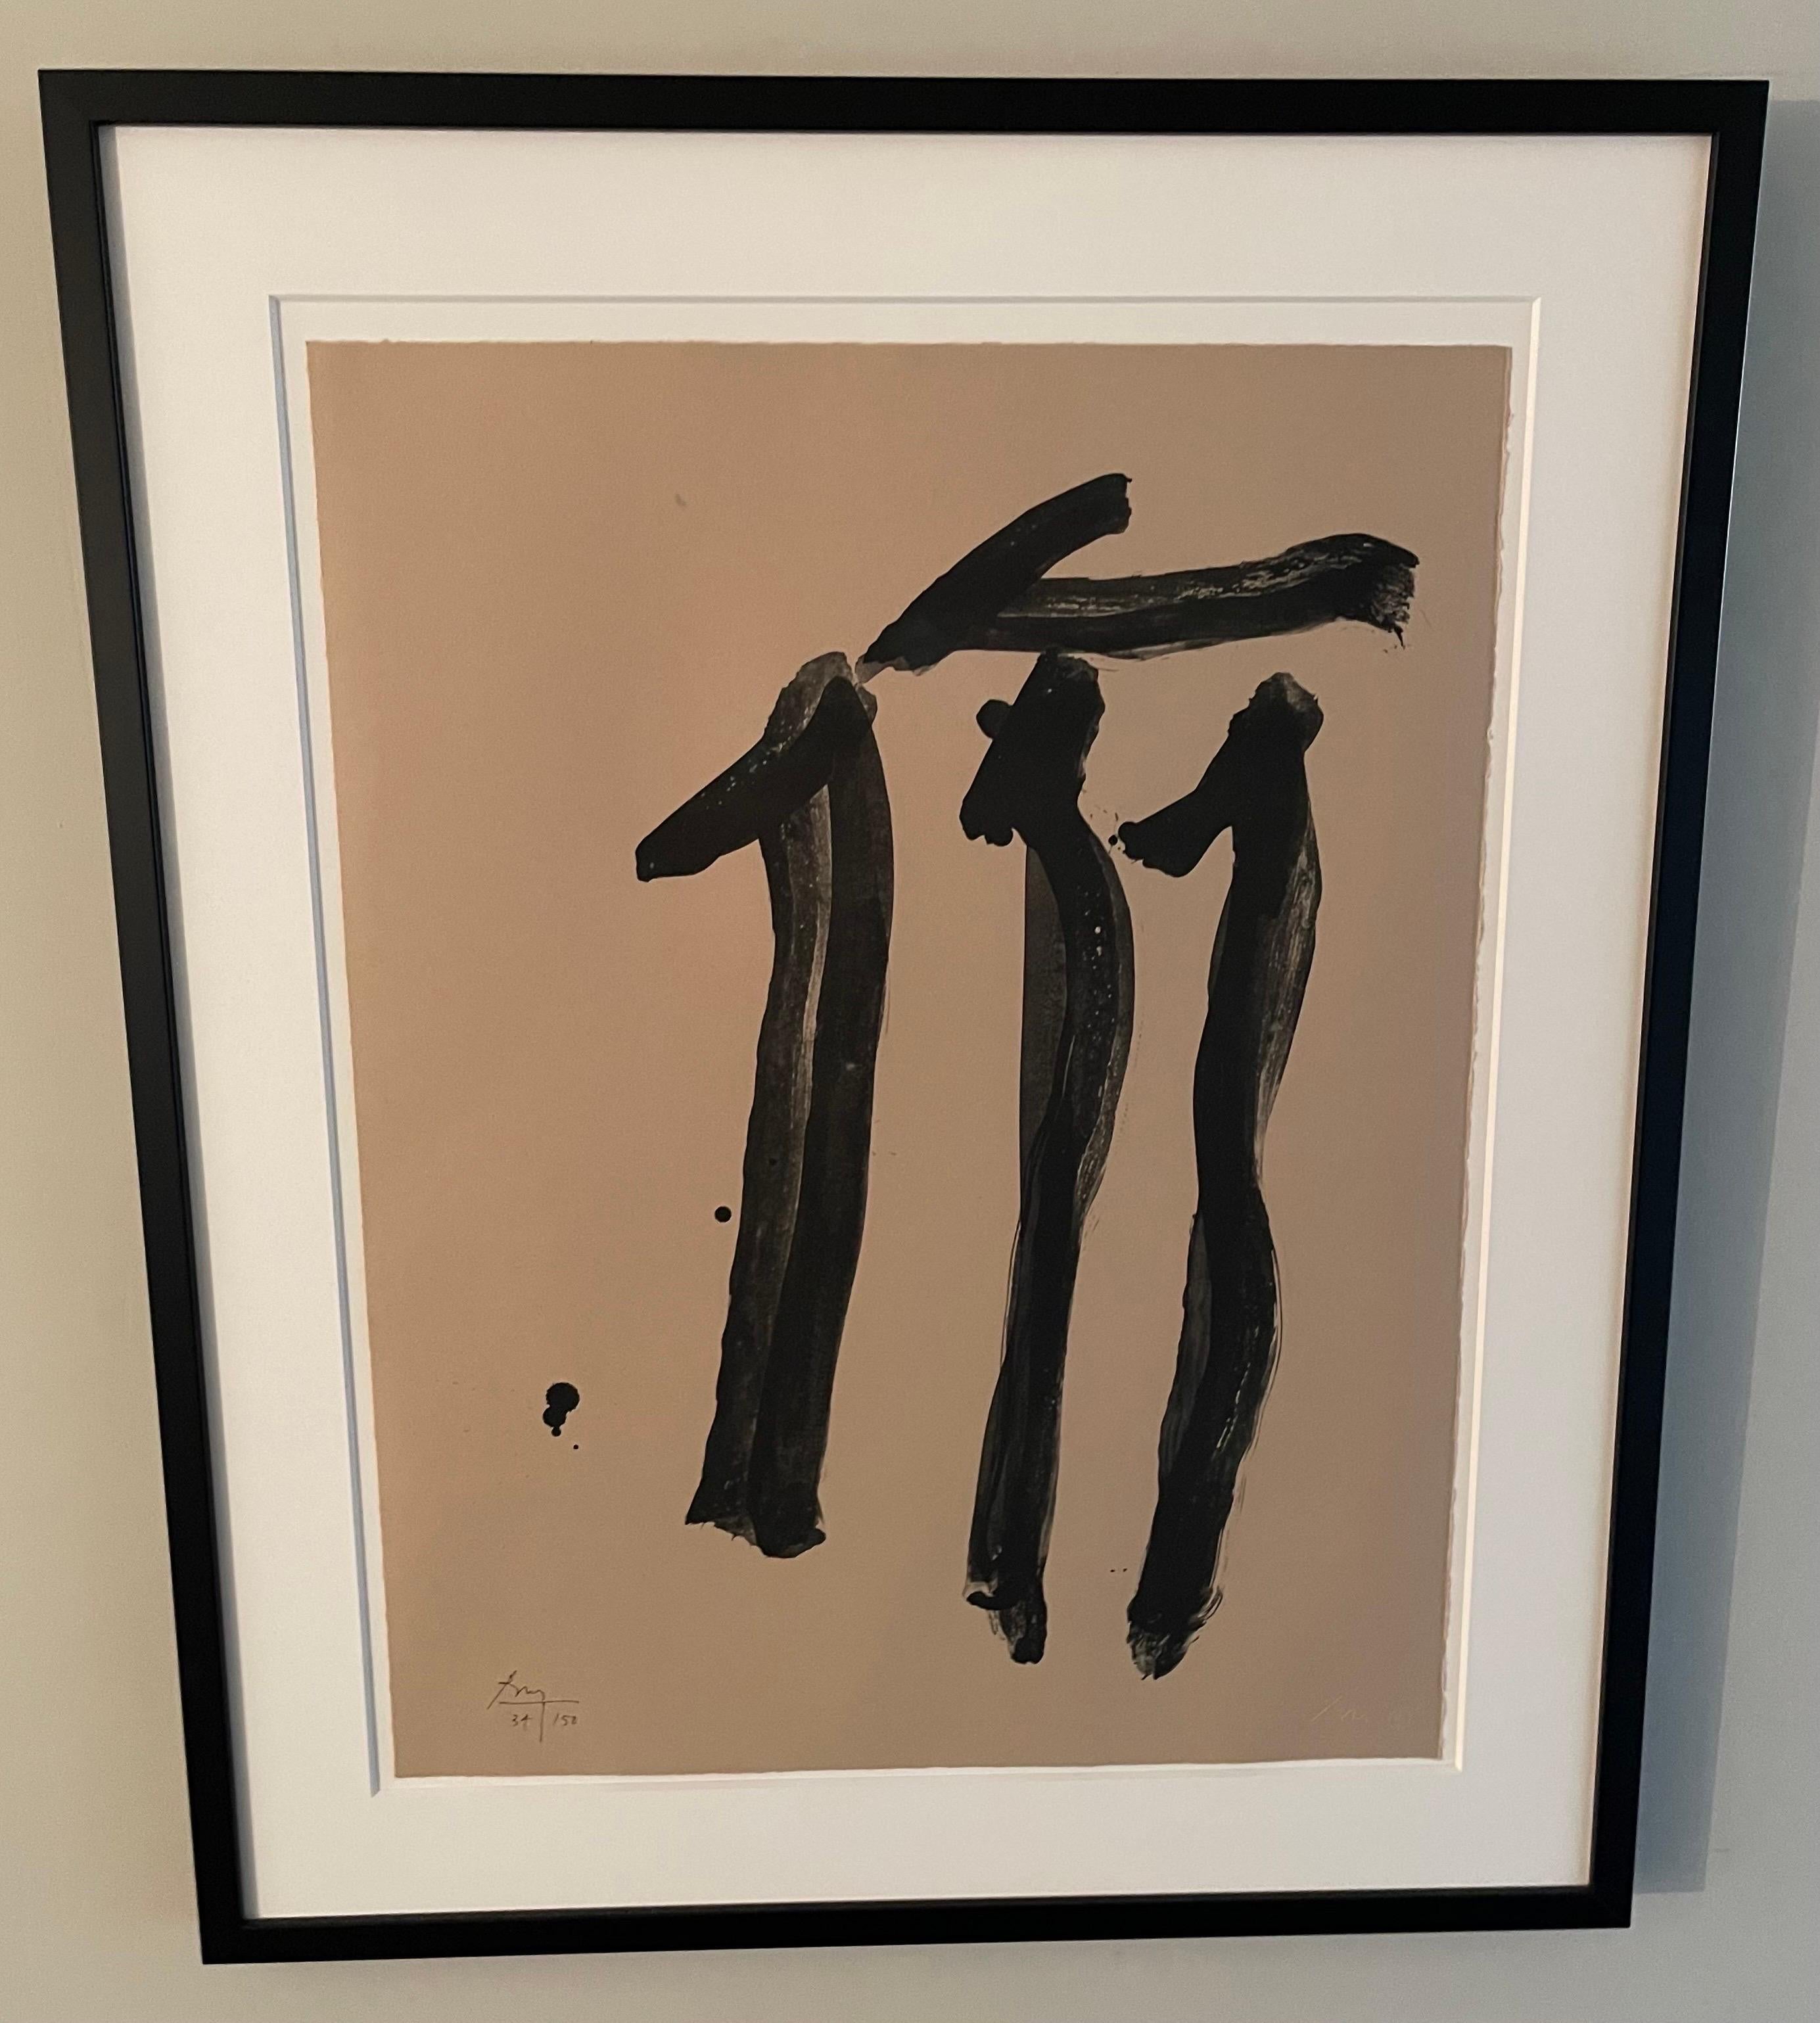 Robert Motherwell Dalton Print 1979 signed lithograph Ed. 34/150
Printed on tan BFK Rives mould-made paper. Printed and published by Tyler Graphics, Ltd., Bedford, NY with the blind stamp lower right.
Newly framed in black matte wood frame.
Frame